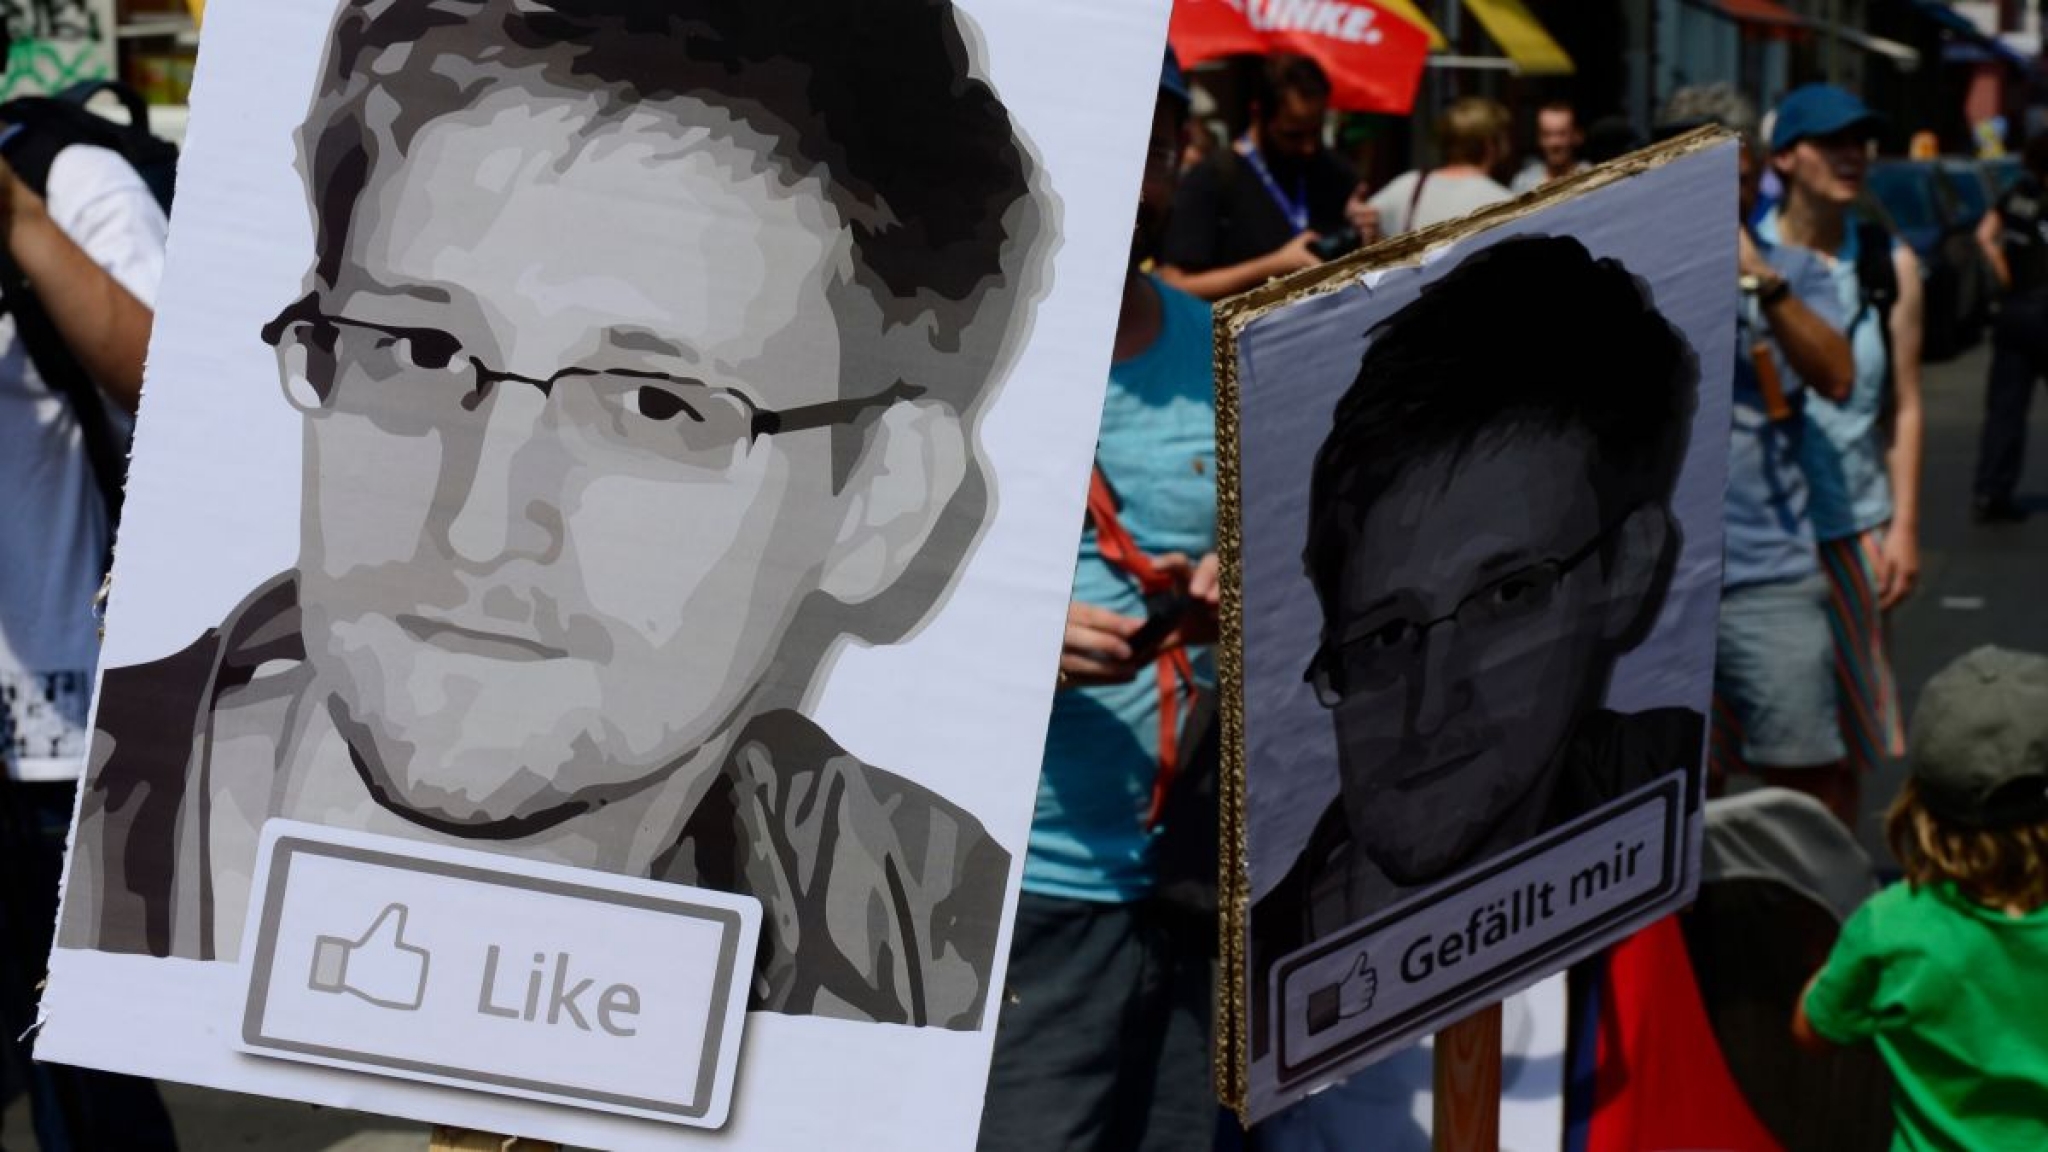 Edward Snowden’s NFT Self-Portrait Sells for $5.4 Million in Charity Auction